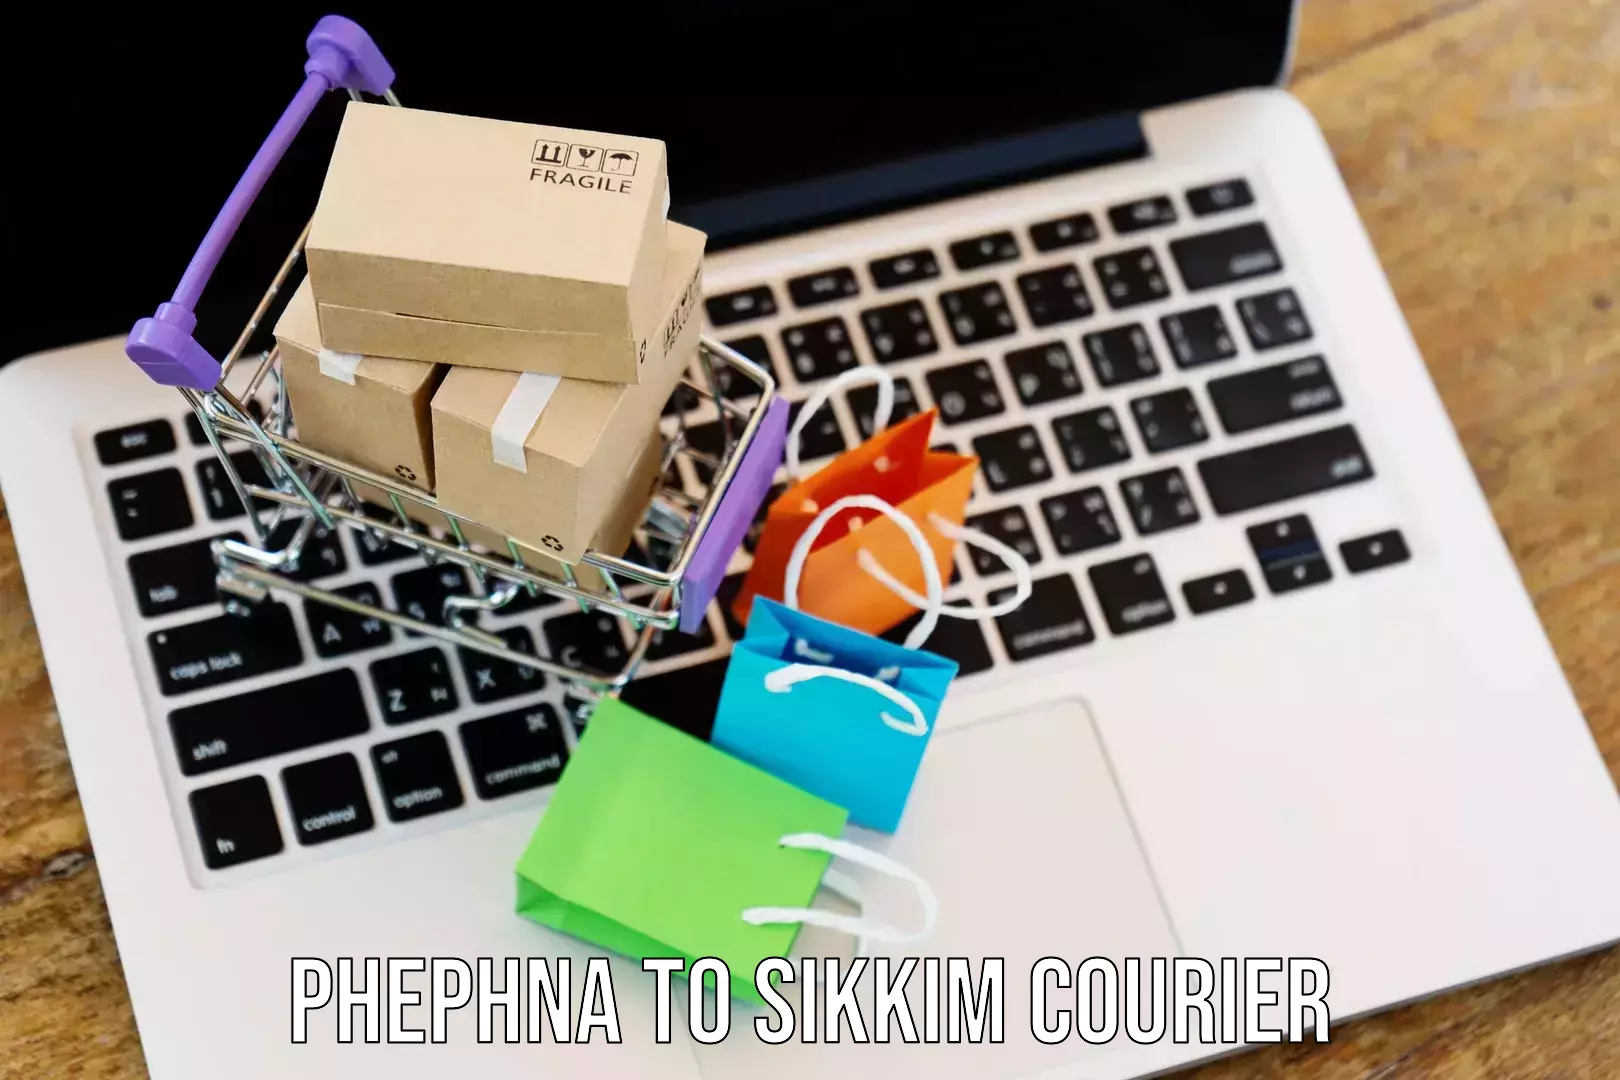 Multi-service courier options Phephna to North Sikkim